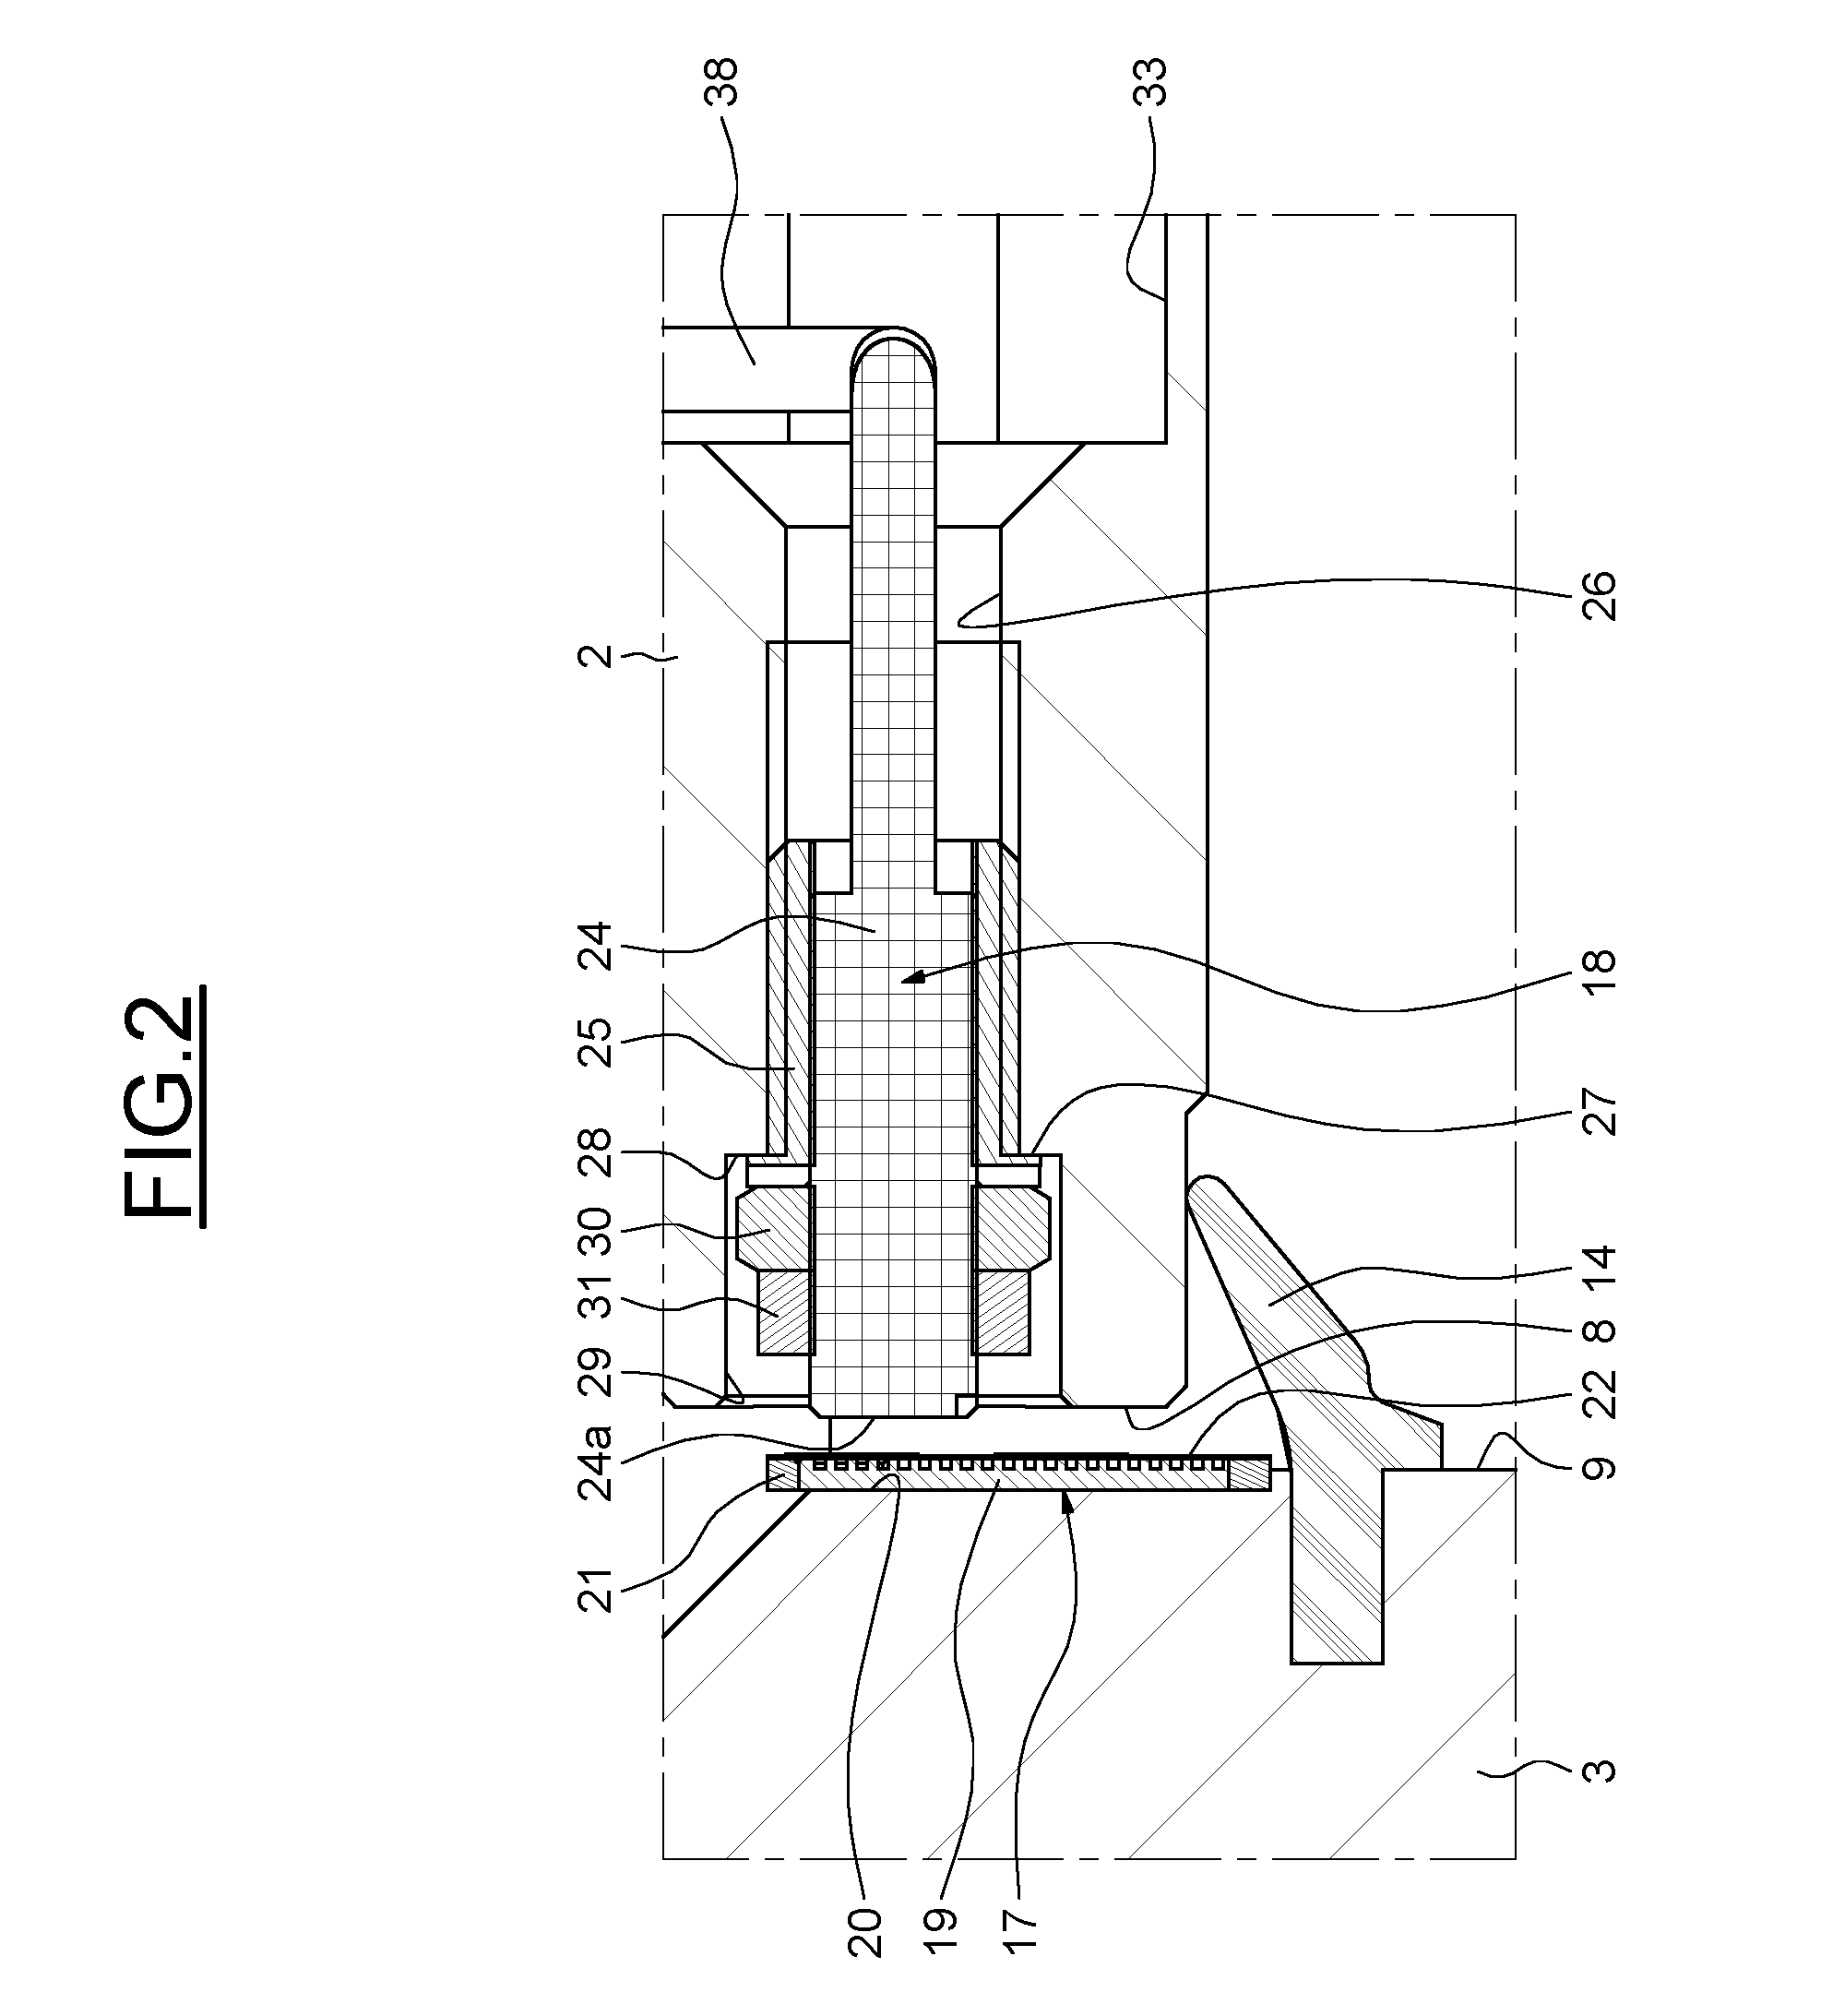 Bearing equipped with an axial displacement detecting device